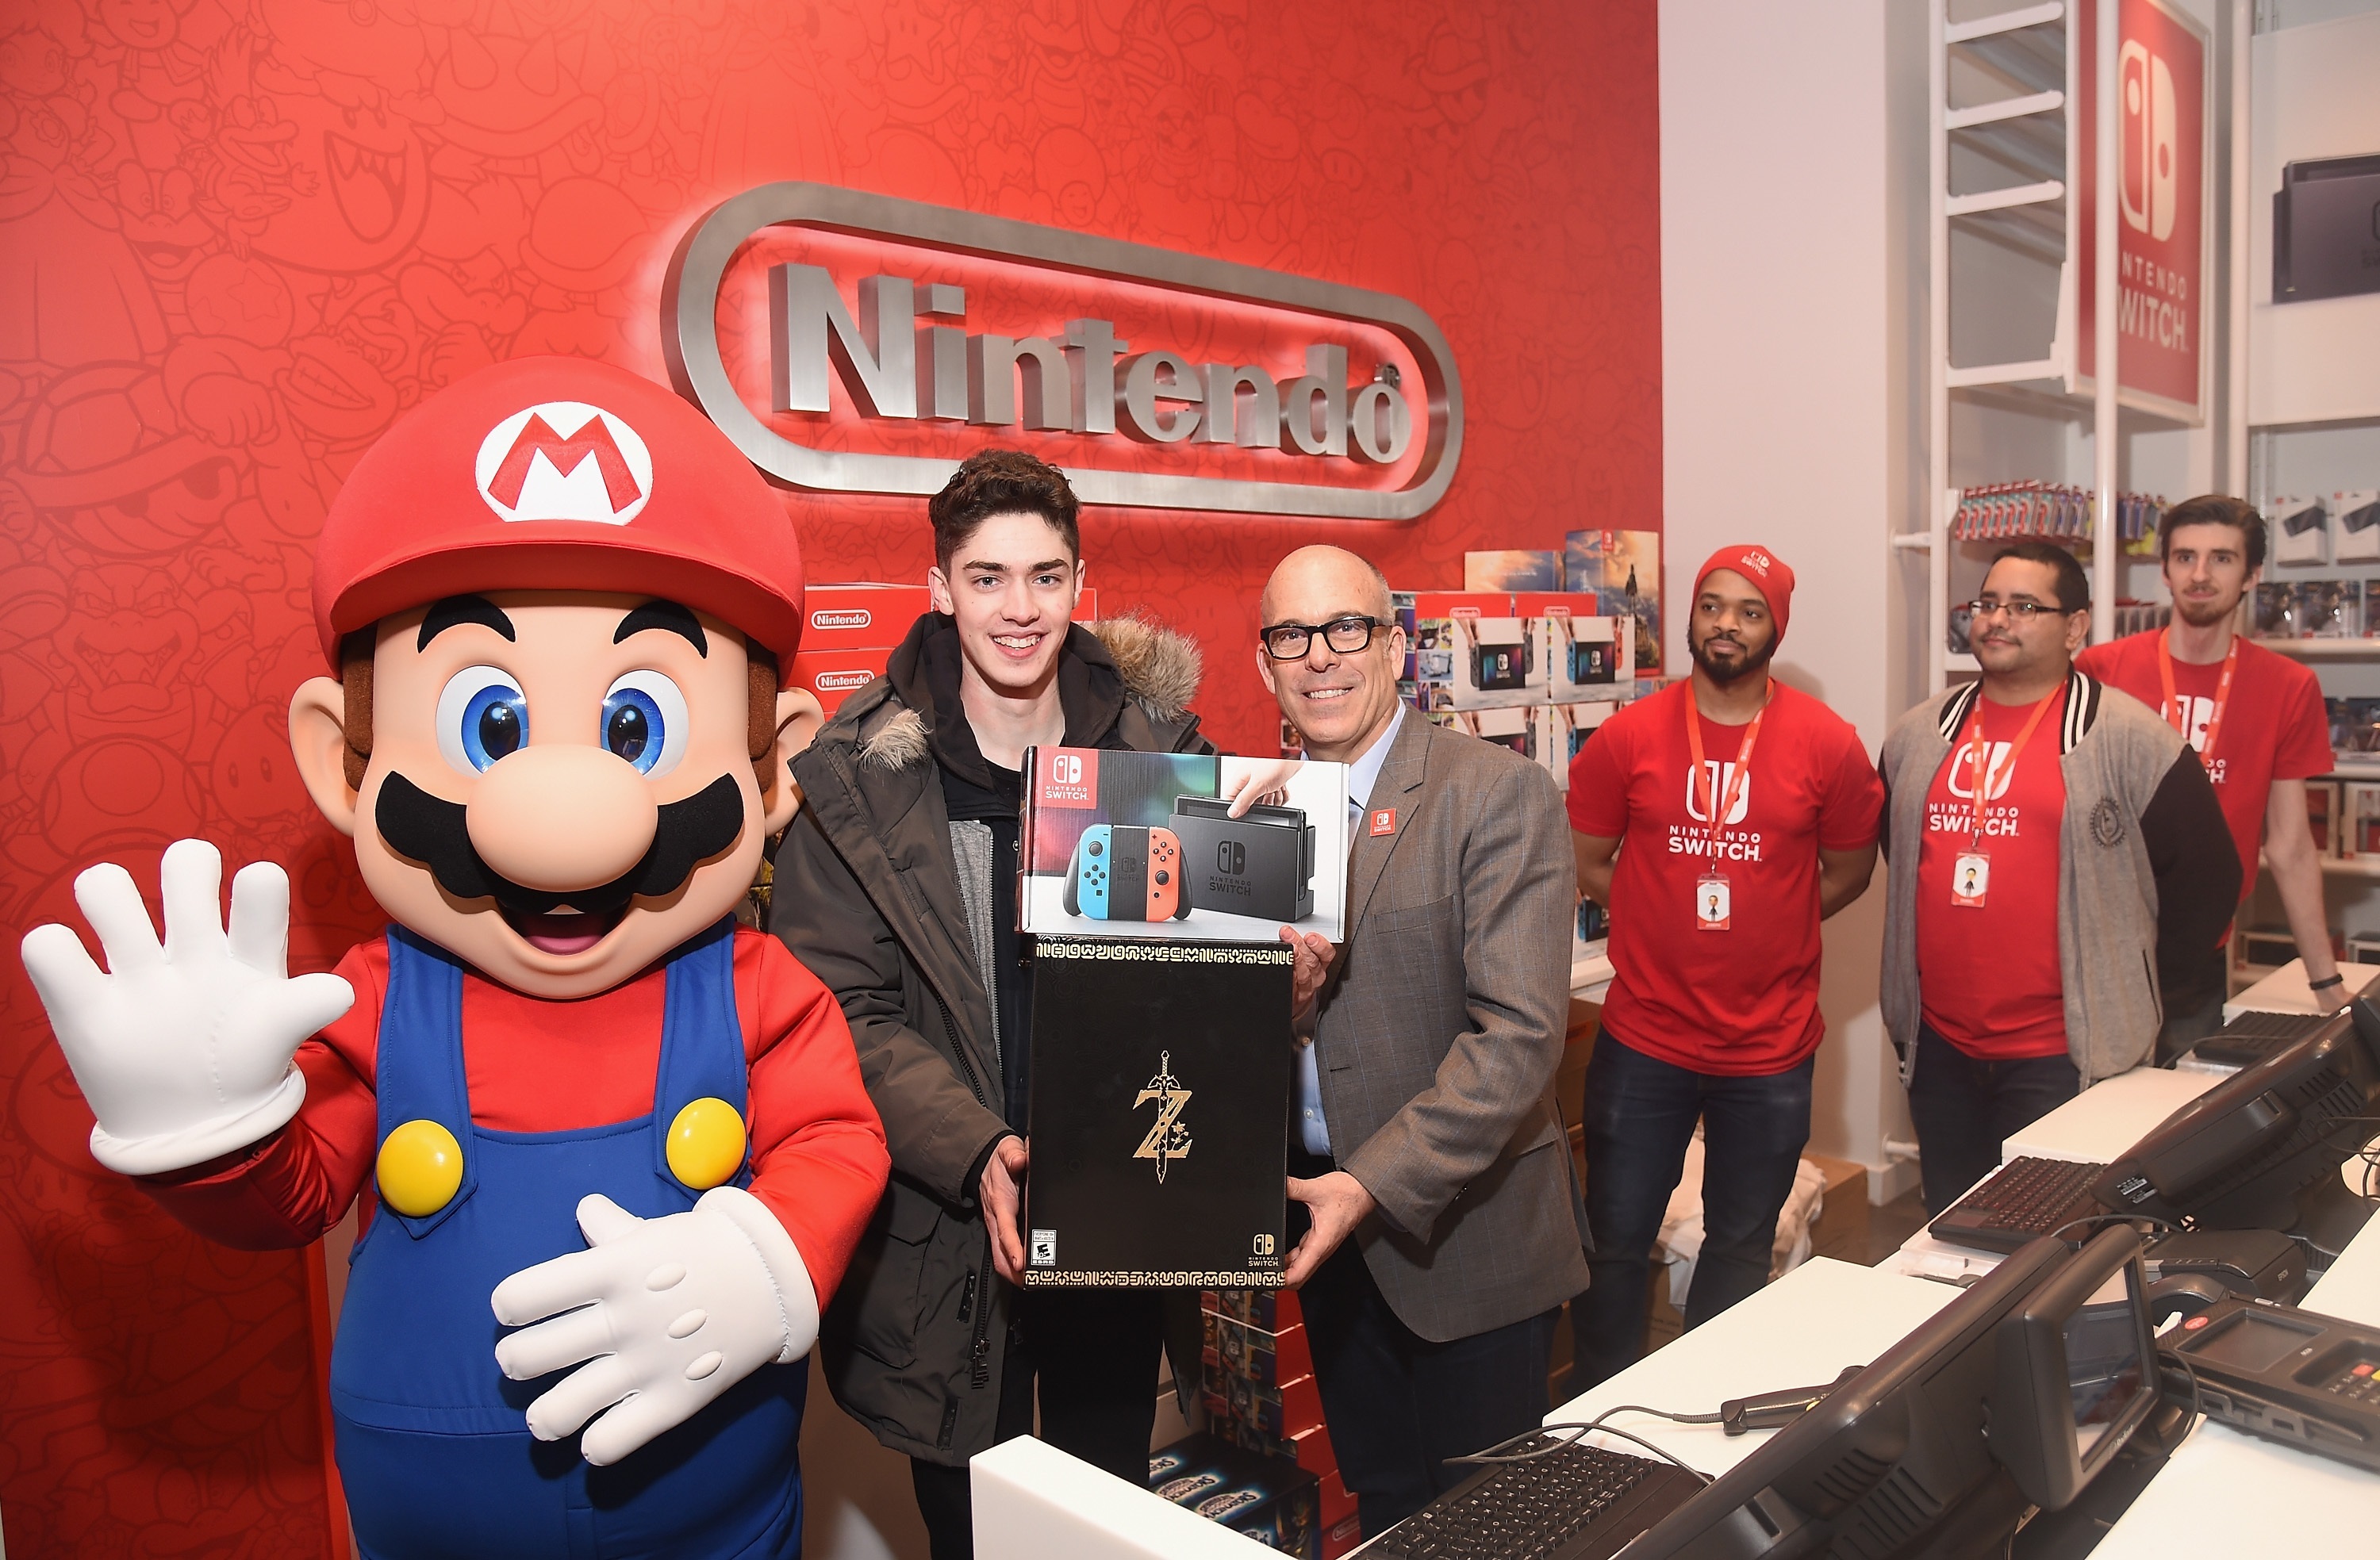 Nintendo Store NY hosting second floor private event on May 5th